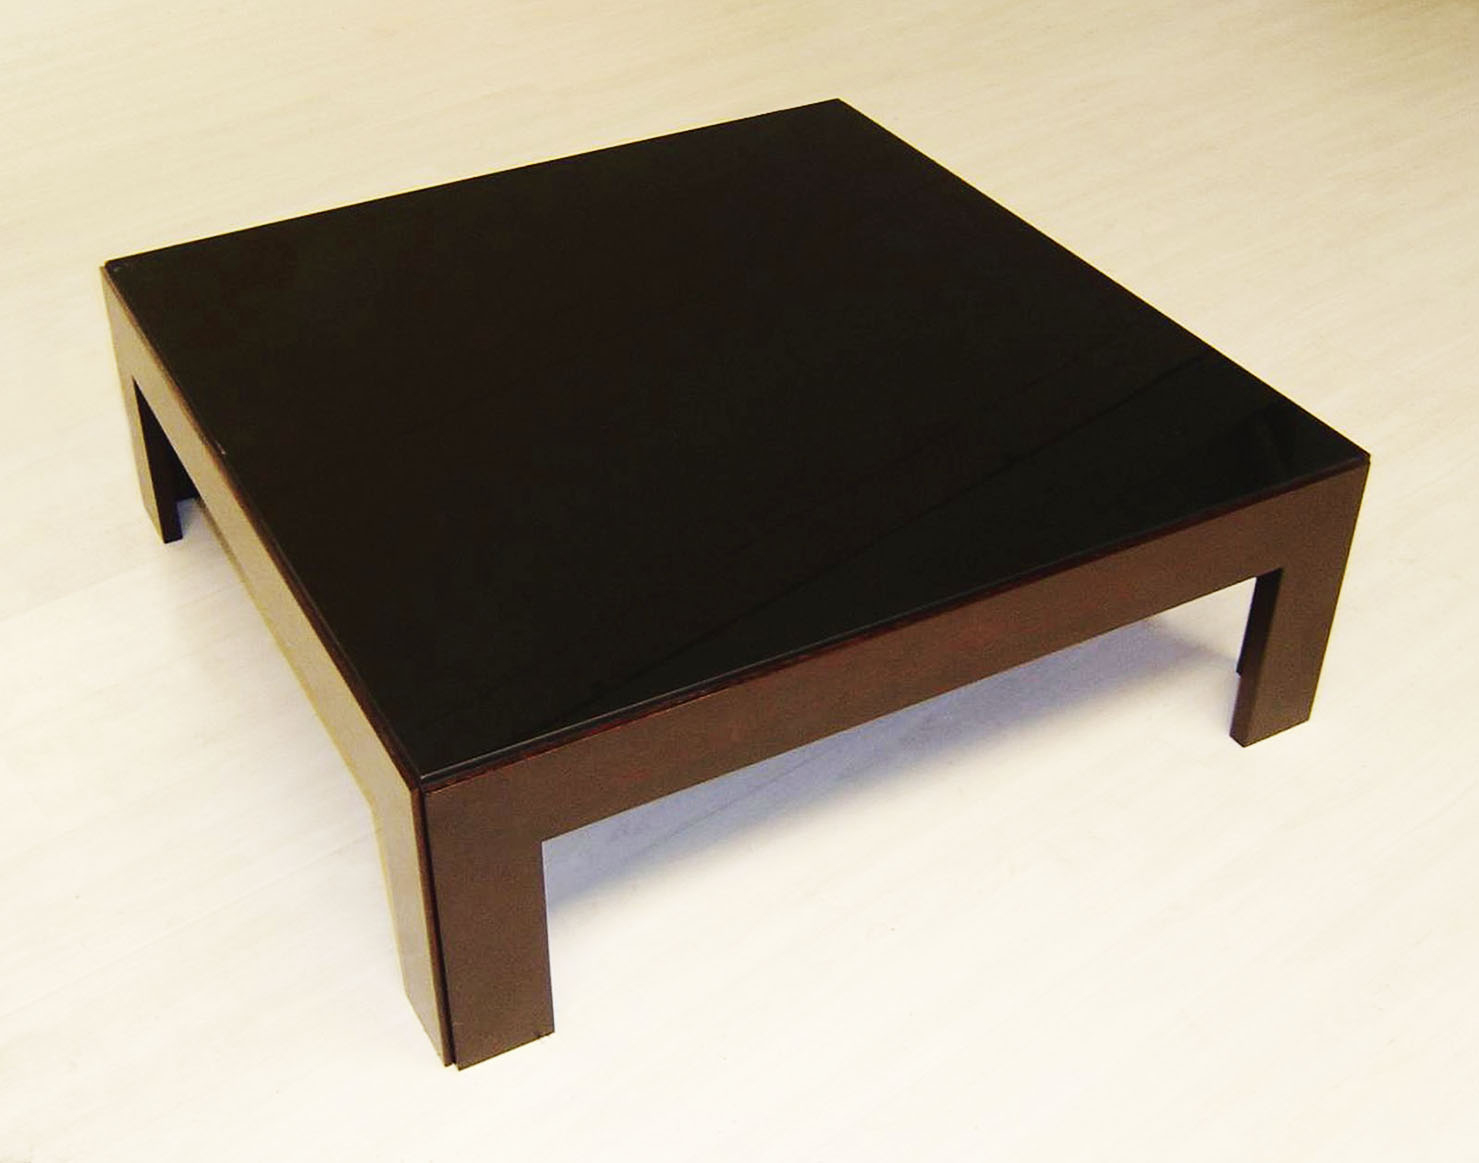 36 Inch Square Coffee Table Hipenmoedernl with regard to proportions 1479 X 1163